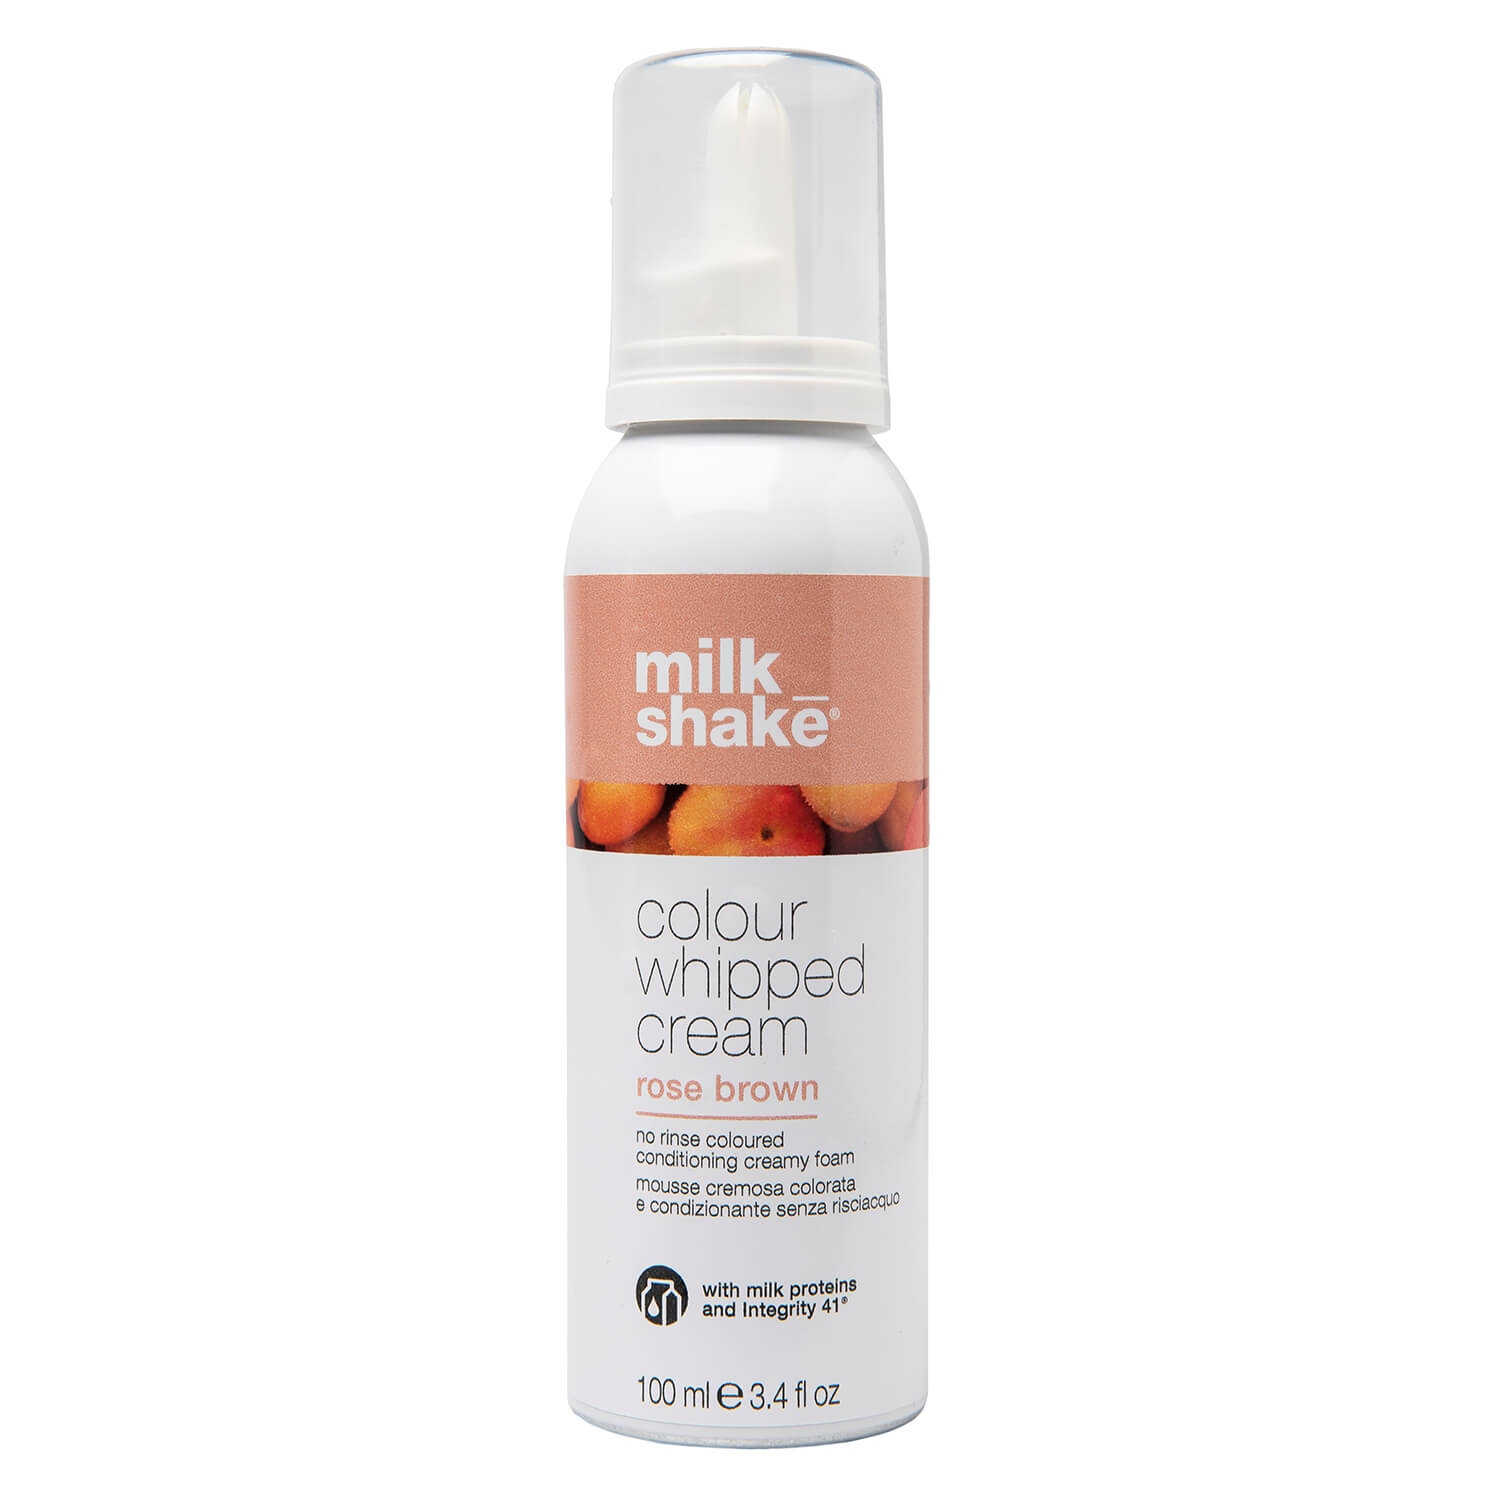 Product image from milk_shake colour whipped cream - rose brown